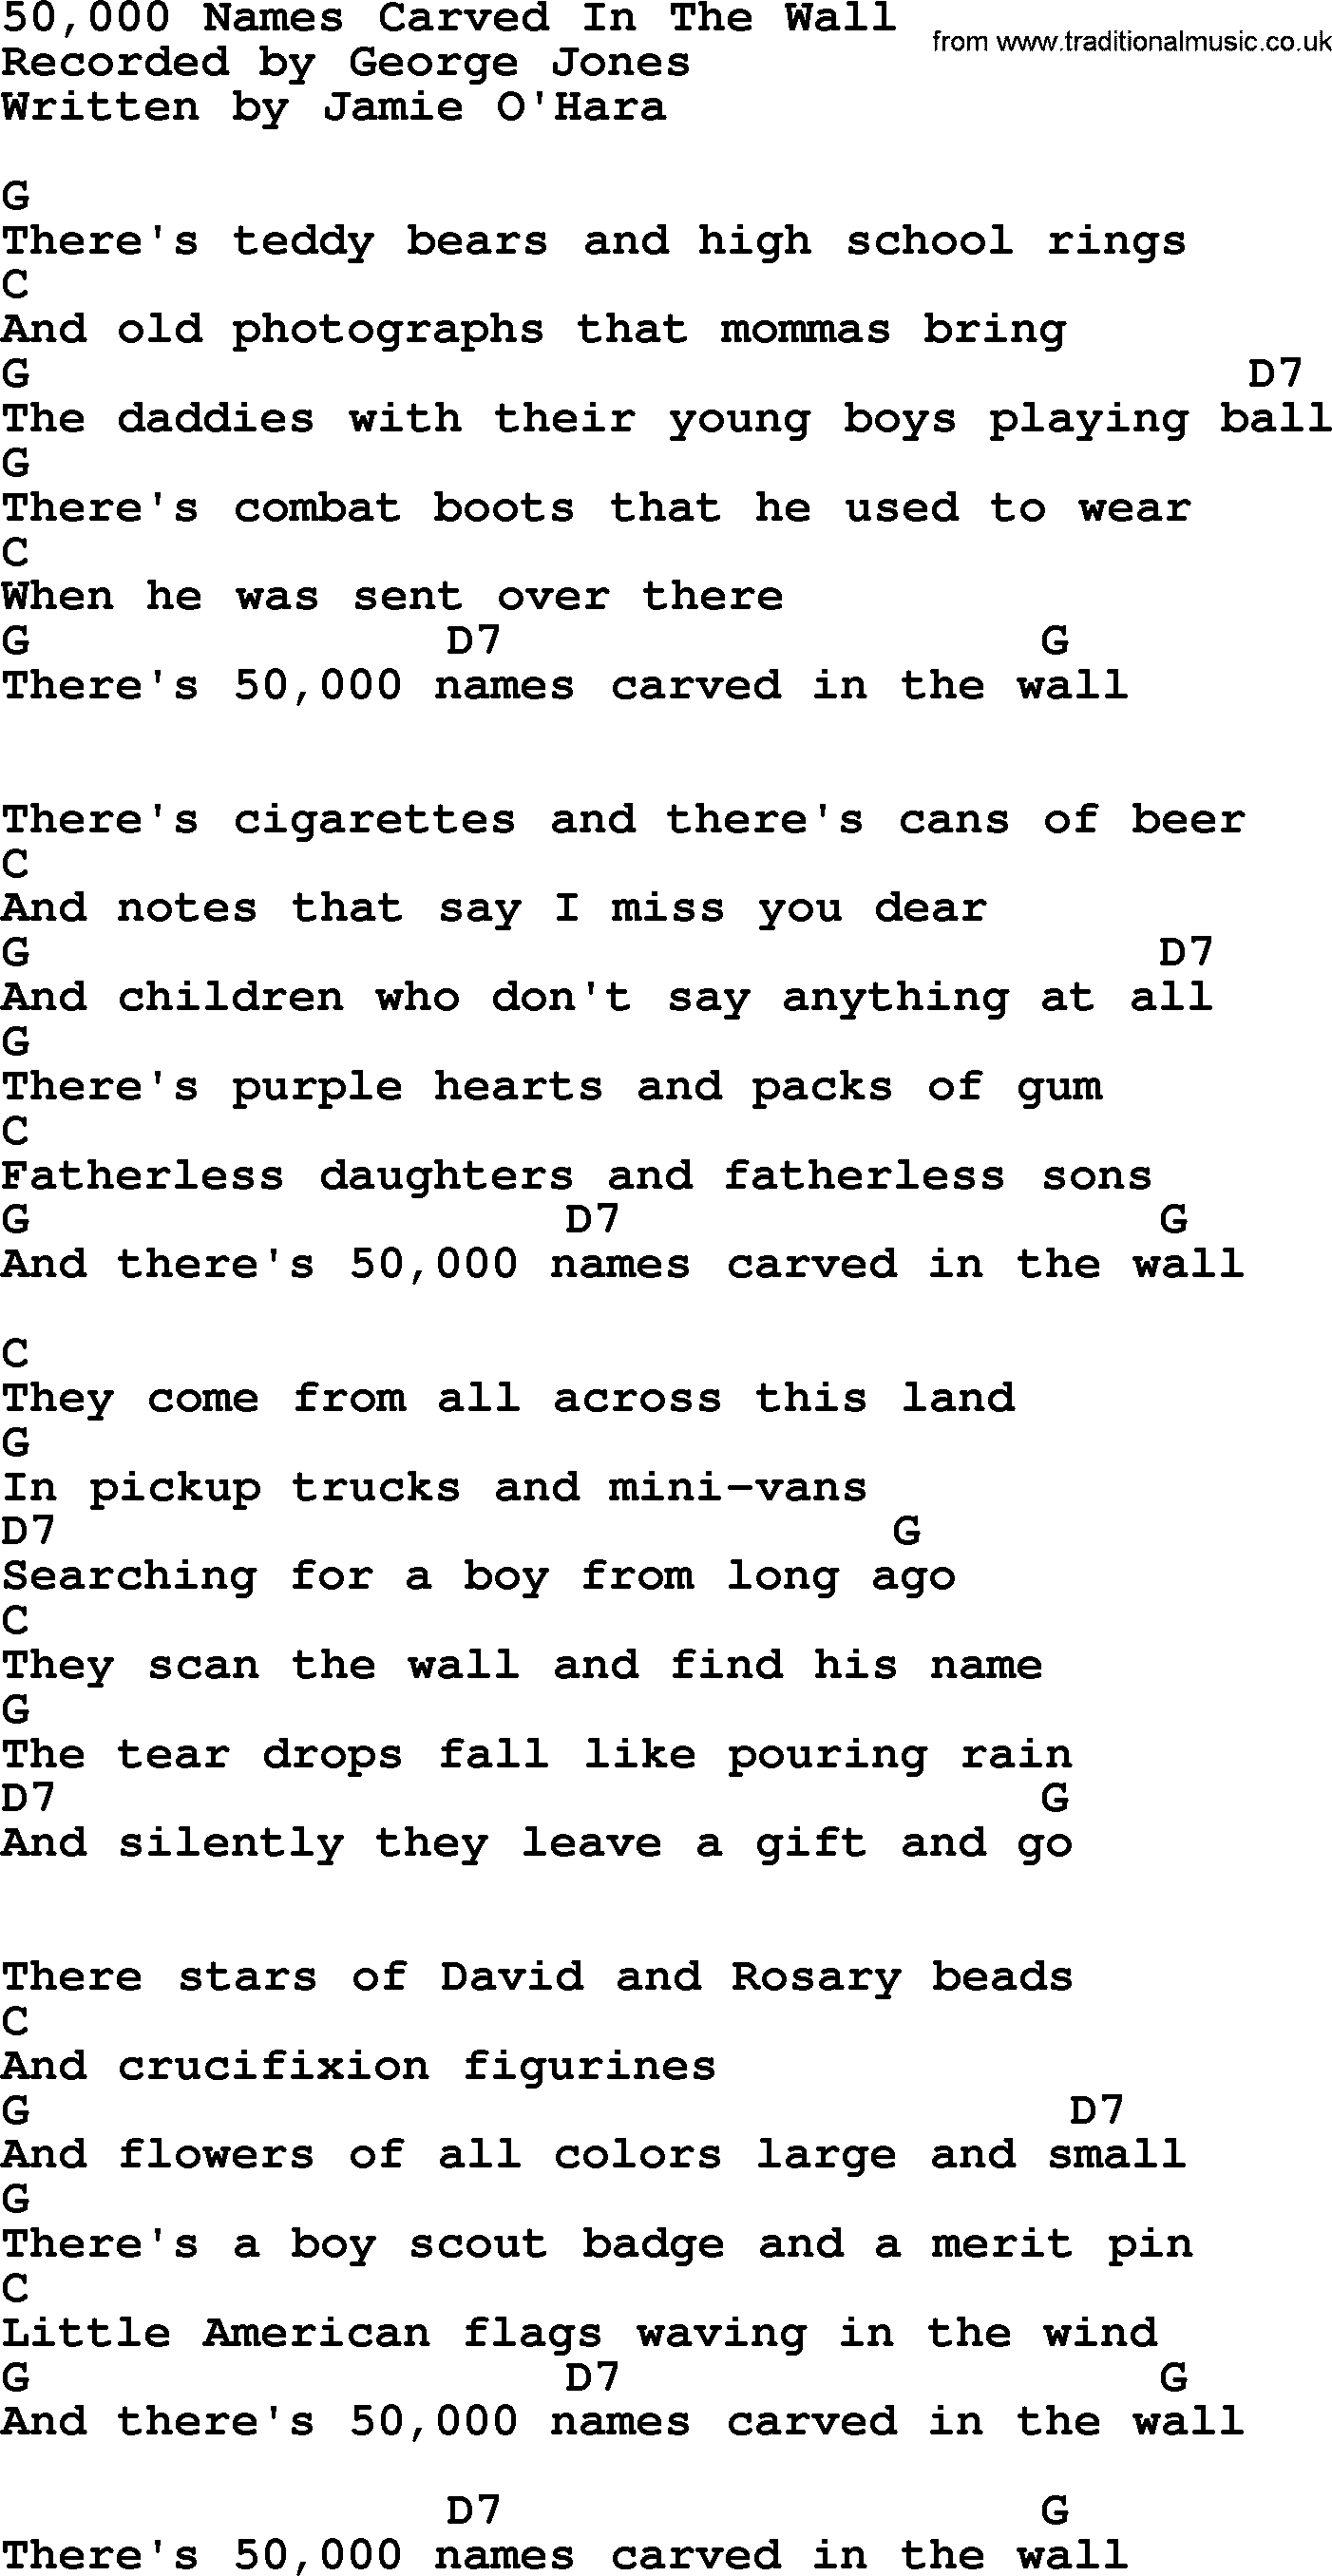 George Jones song: 50,000 Names Carved In The Wall, lyrics and chords